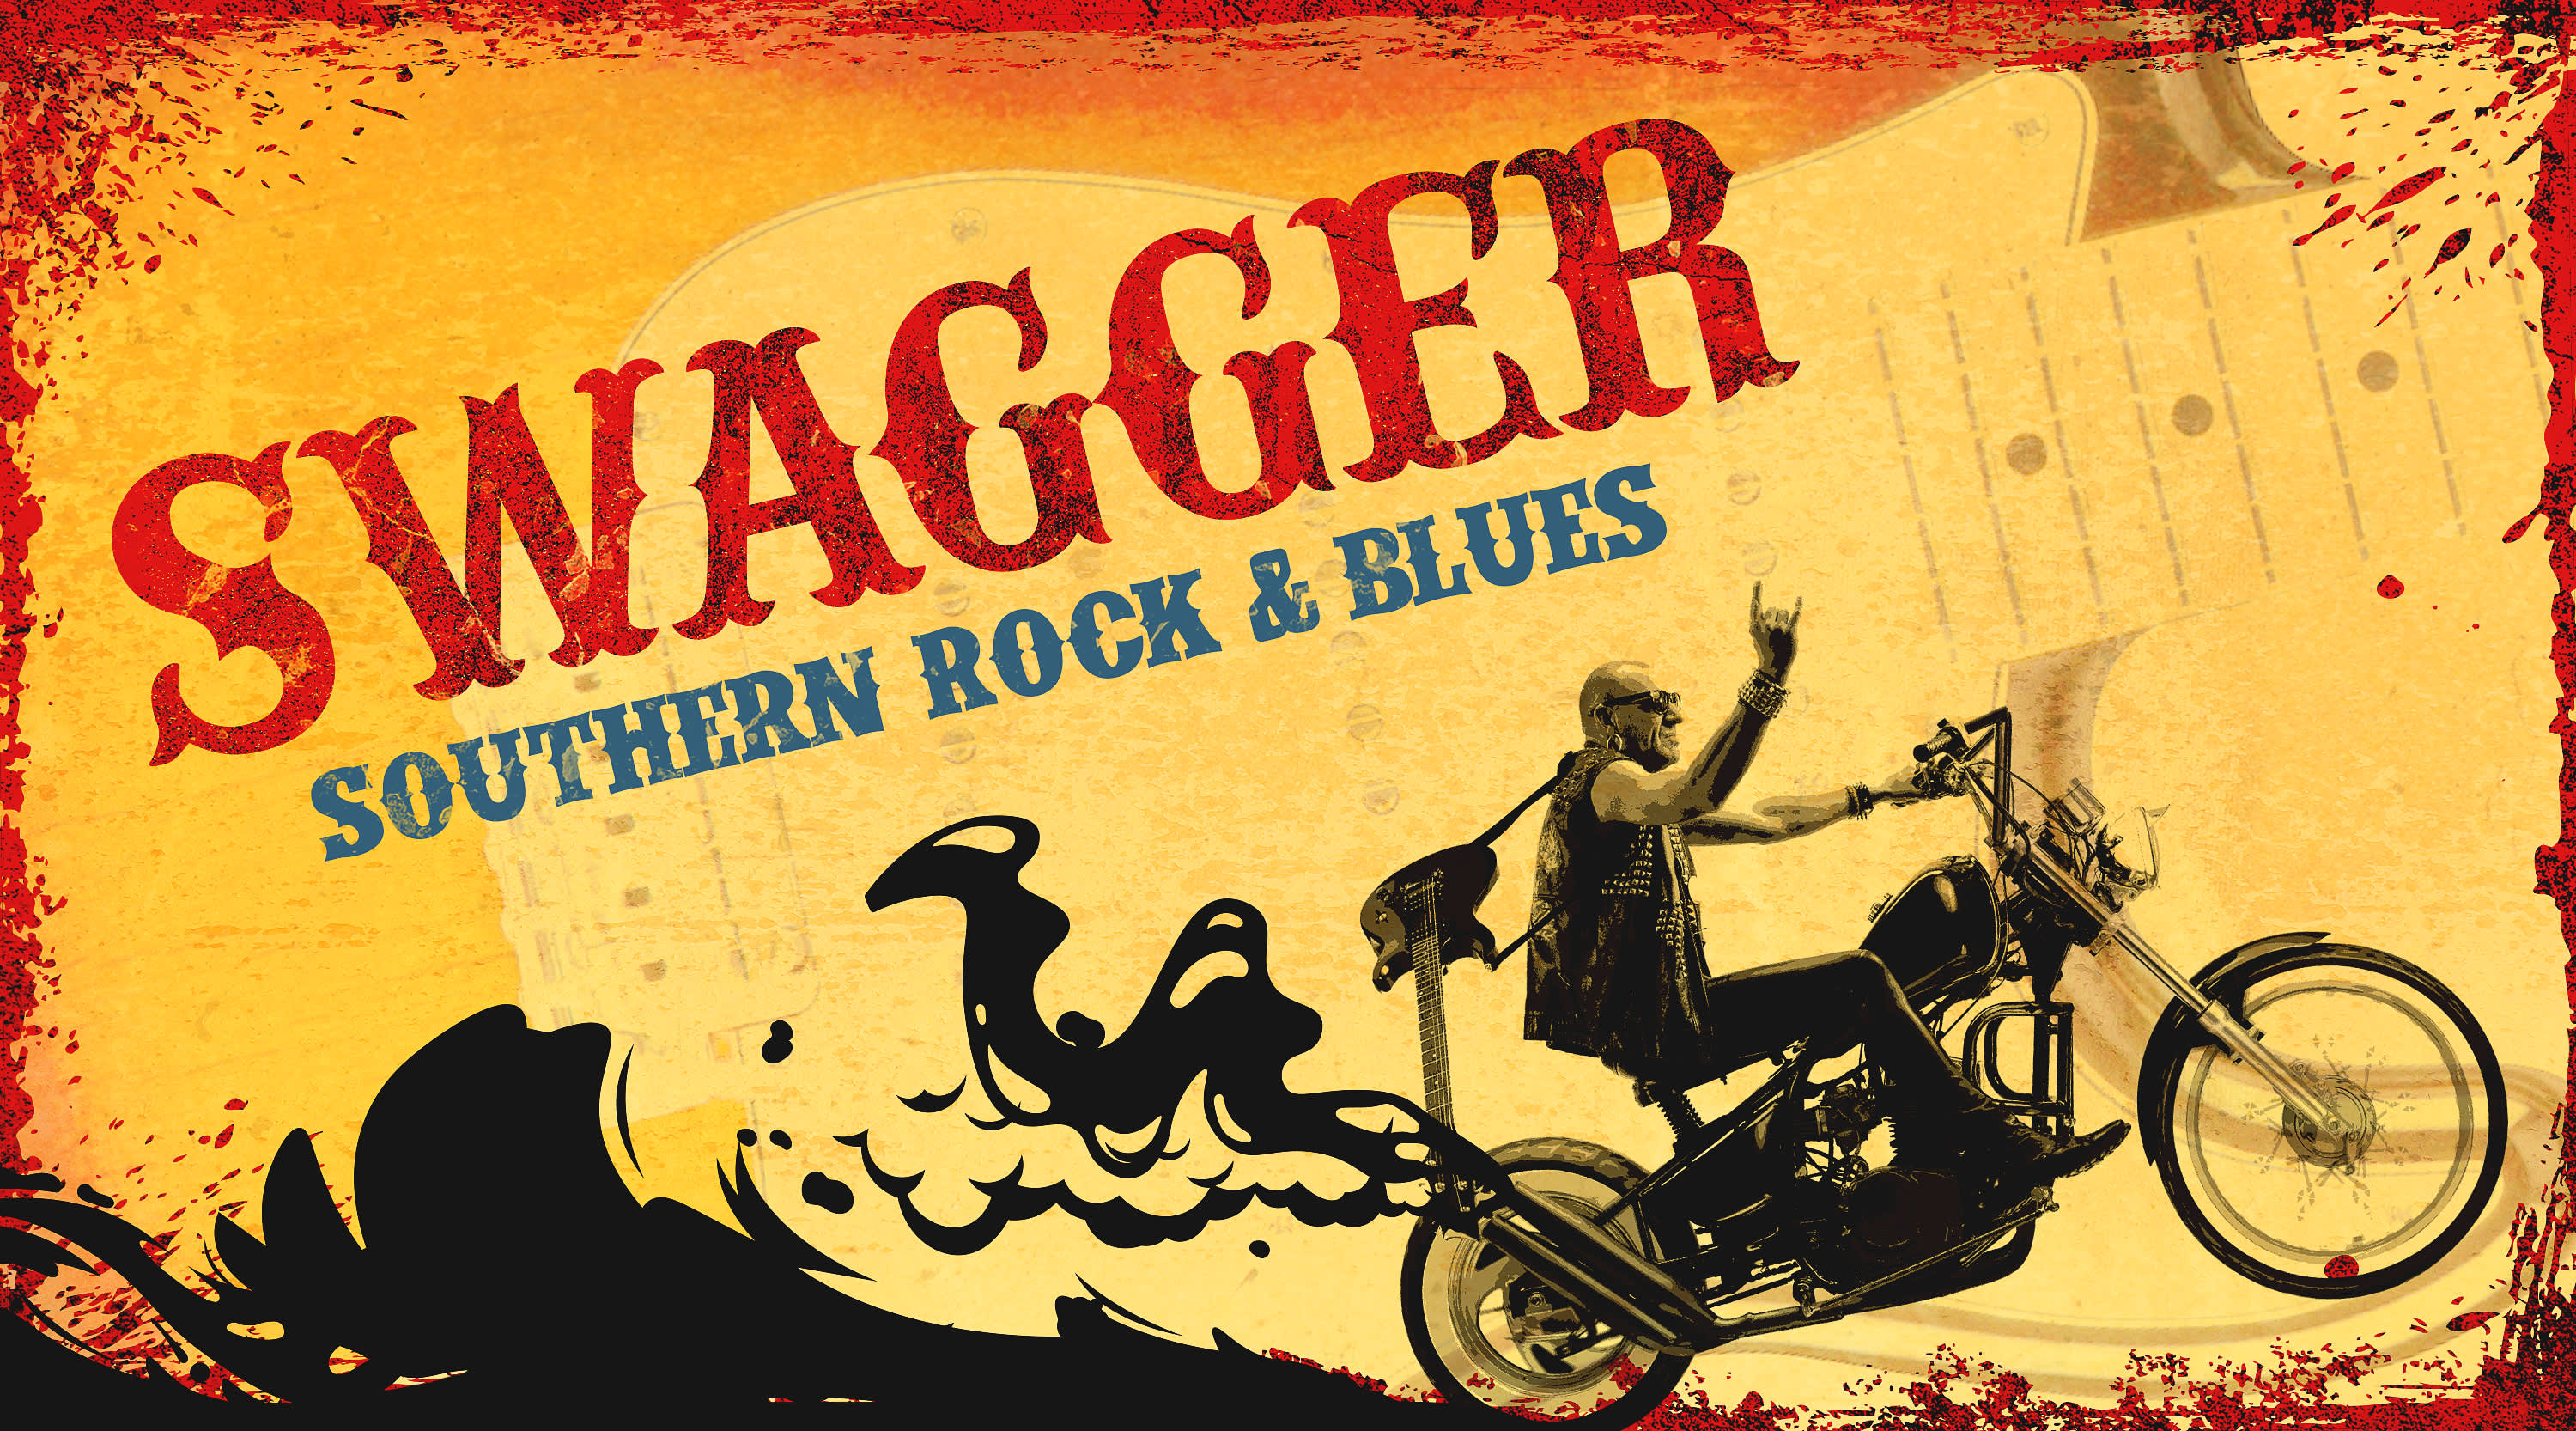 Swagger Southern Rock & Blues